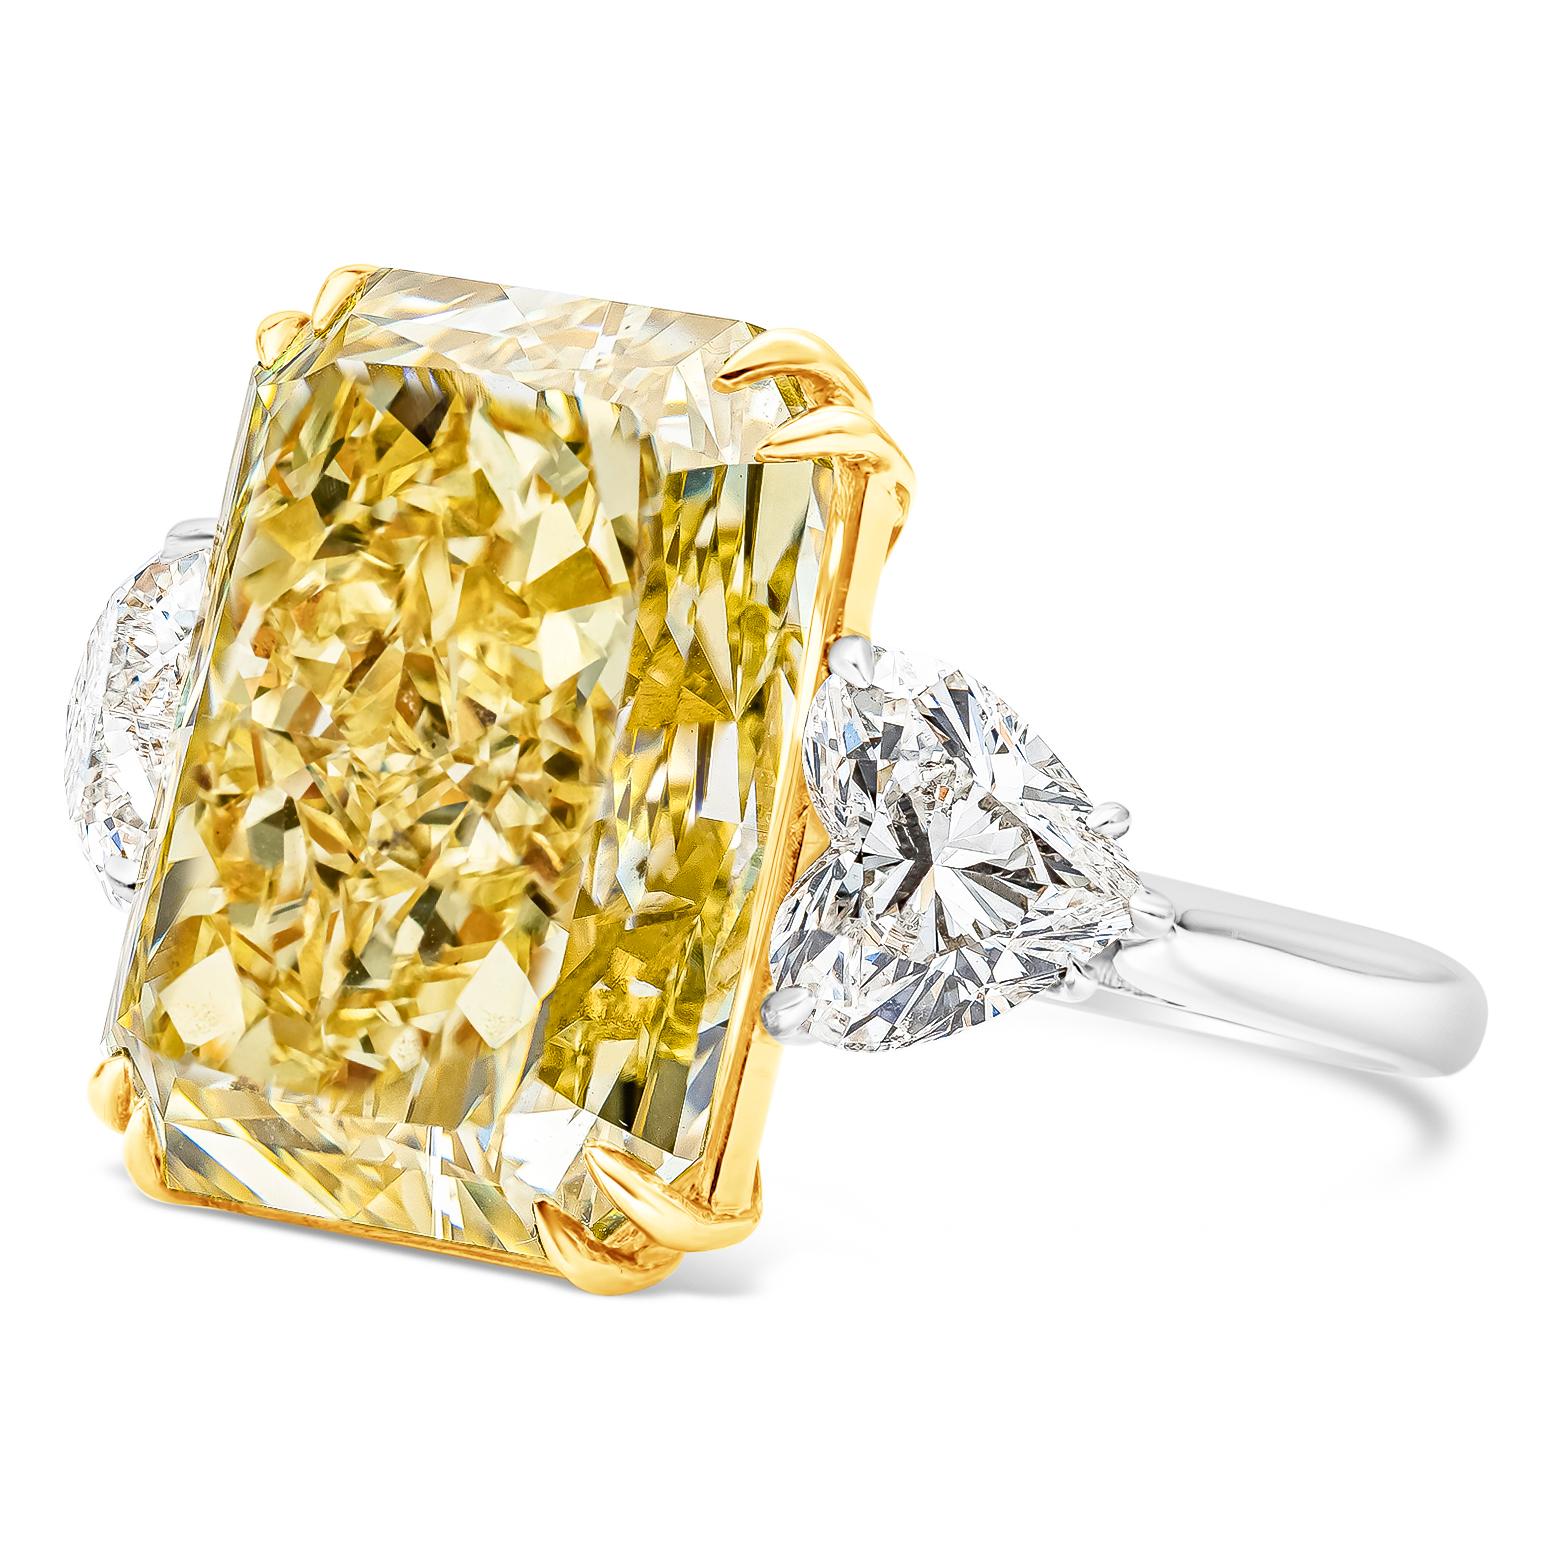 Rare and color rich three-stone engagement ring featuring a vibrant 17.25 carat elongated radiant cut diamond certified by GIA as fancy intense yellow, VS2 clarity, set in an eight prong 18K yellow gold basket. Flanking the center stone are